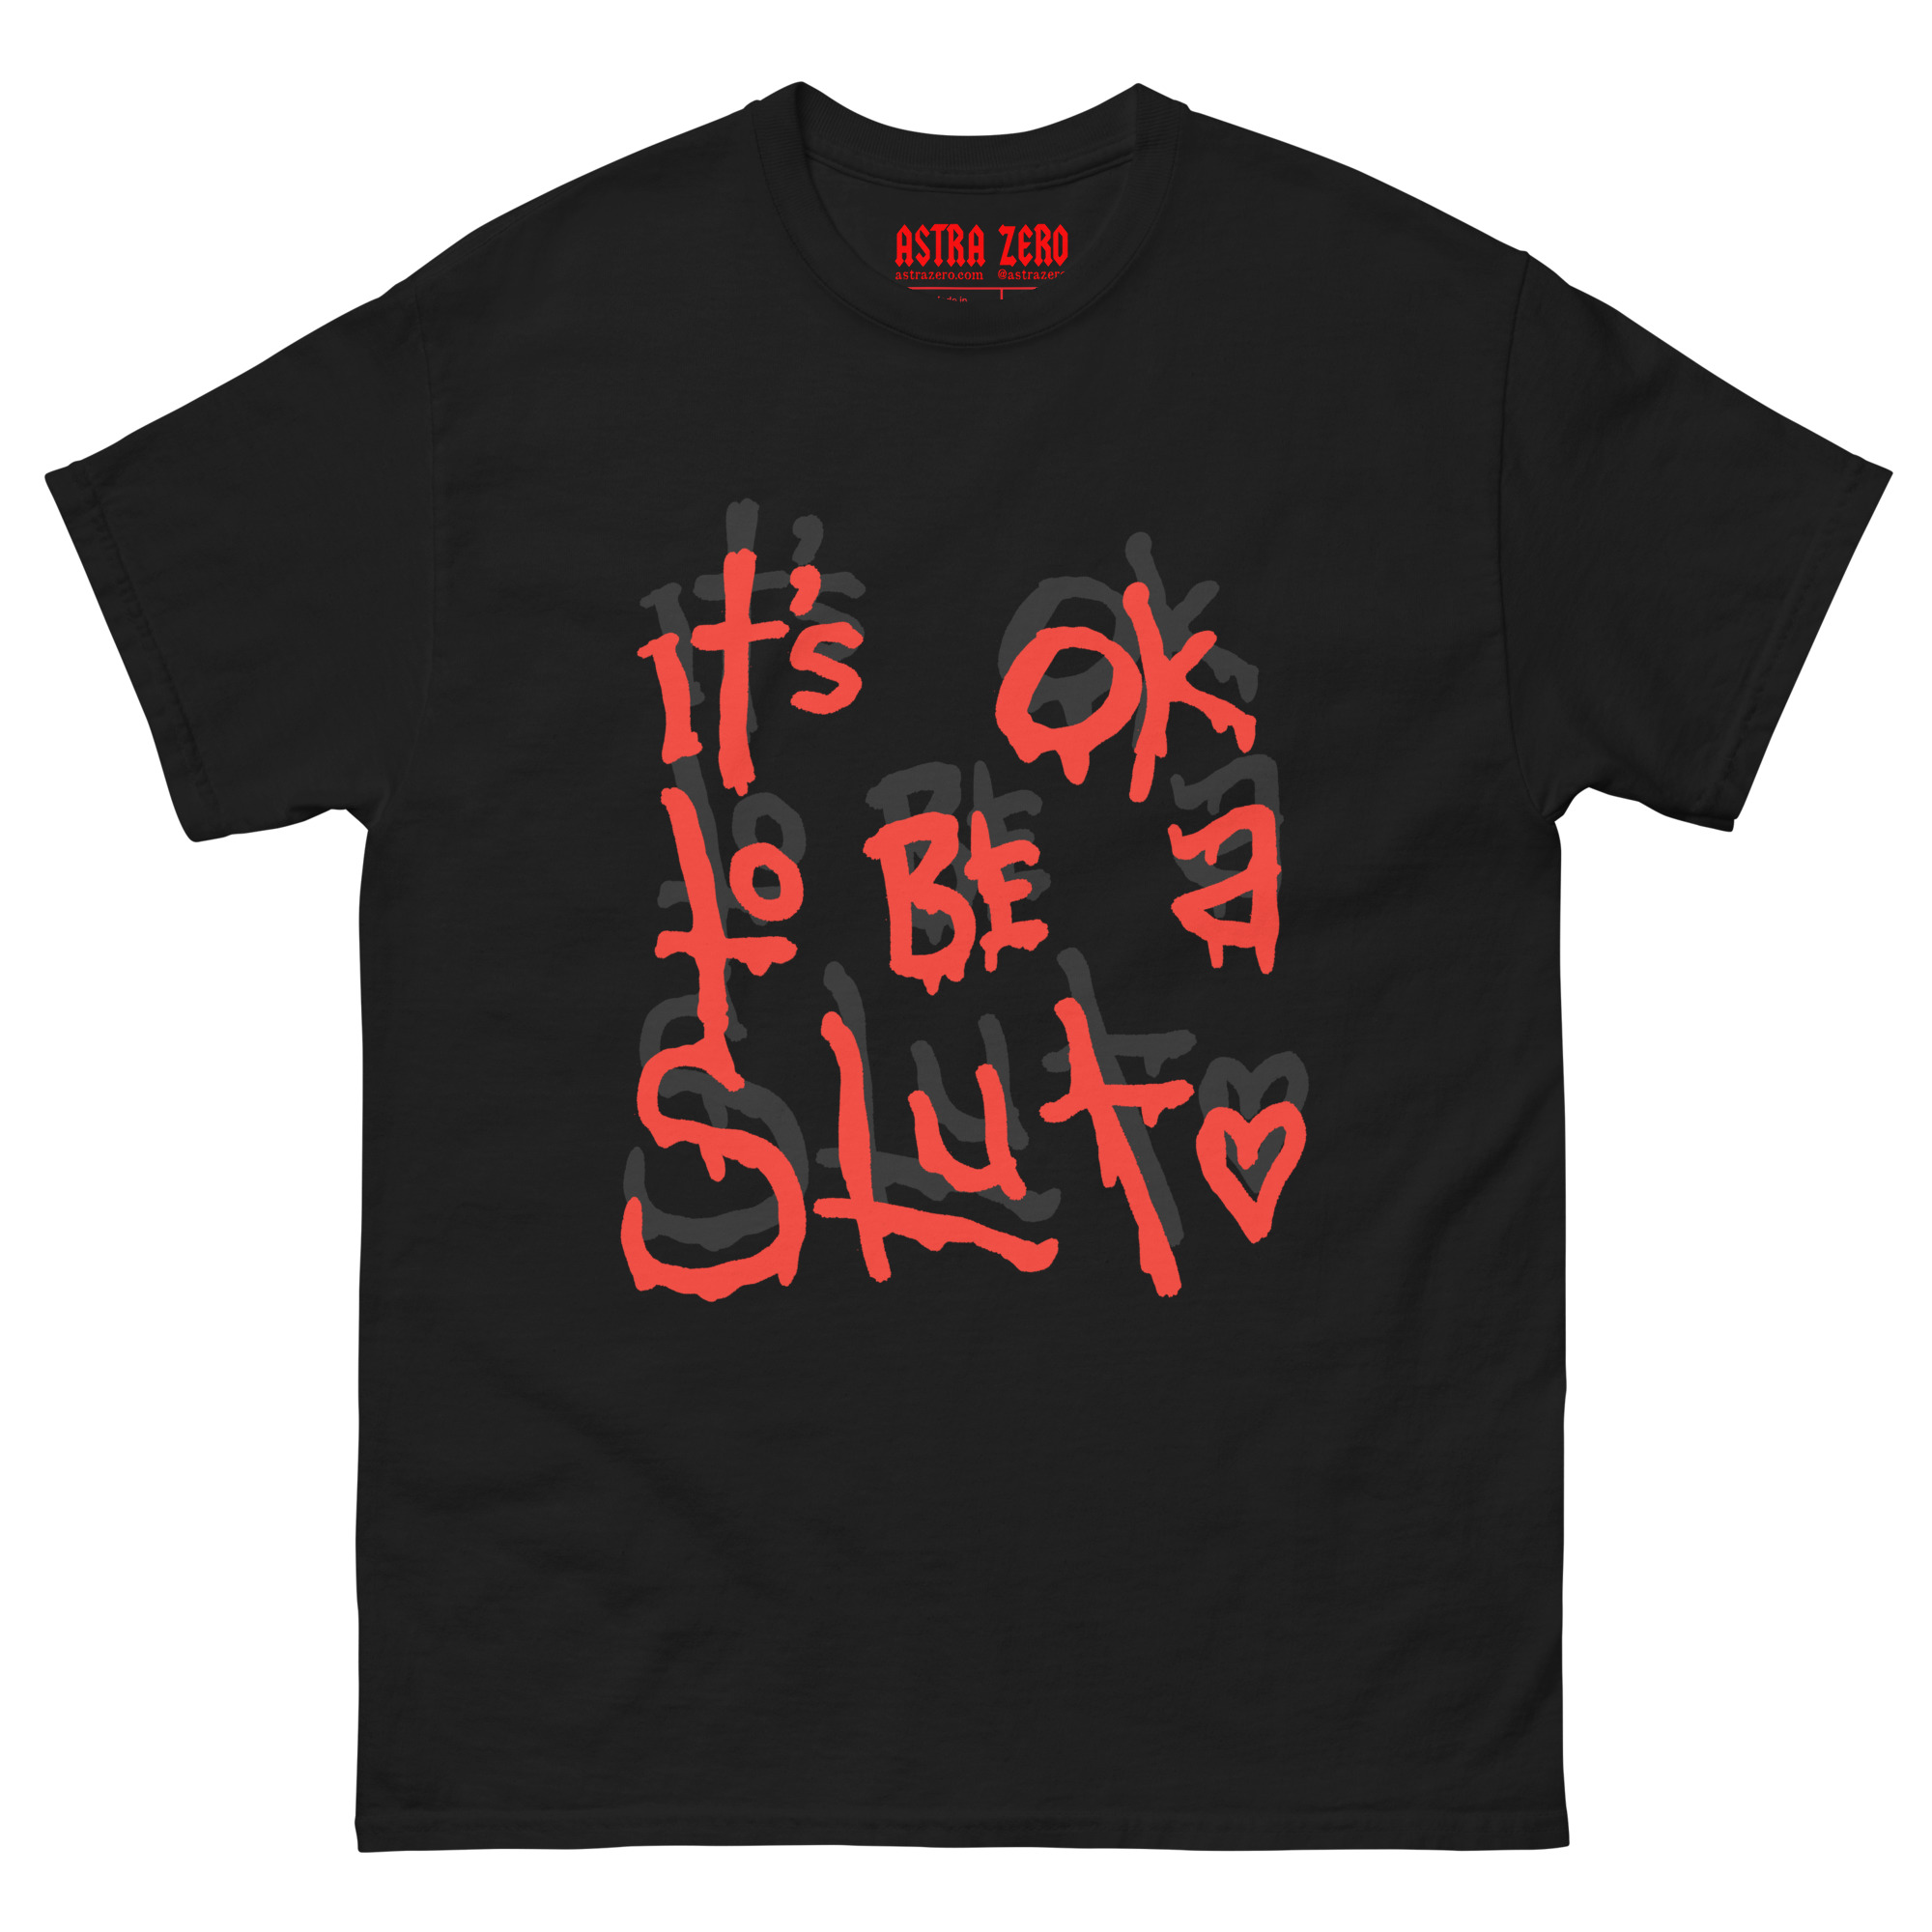 Featured image for “It’s ok to be a slut  - Men's classic tee”